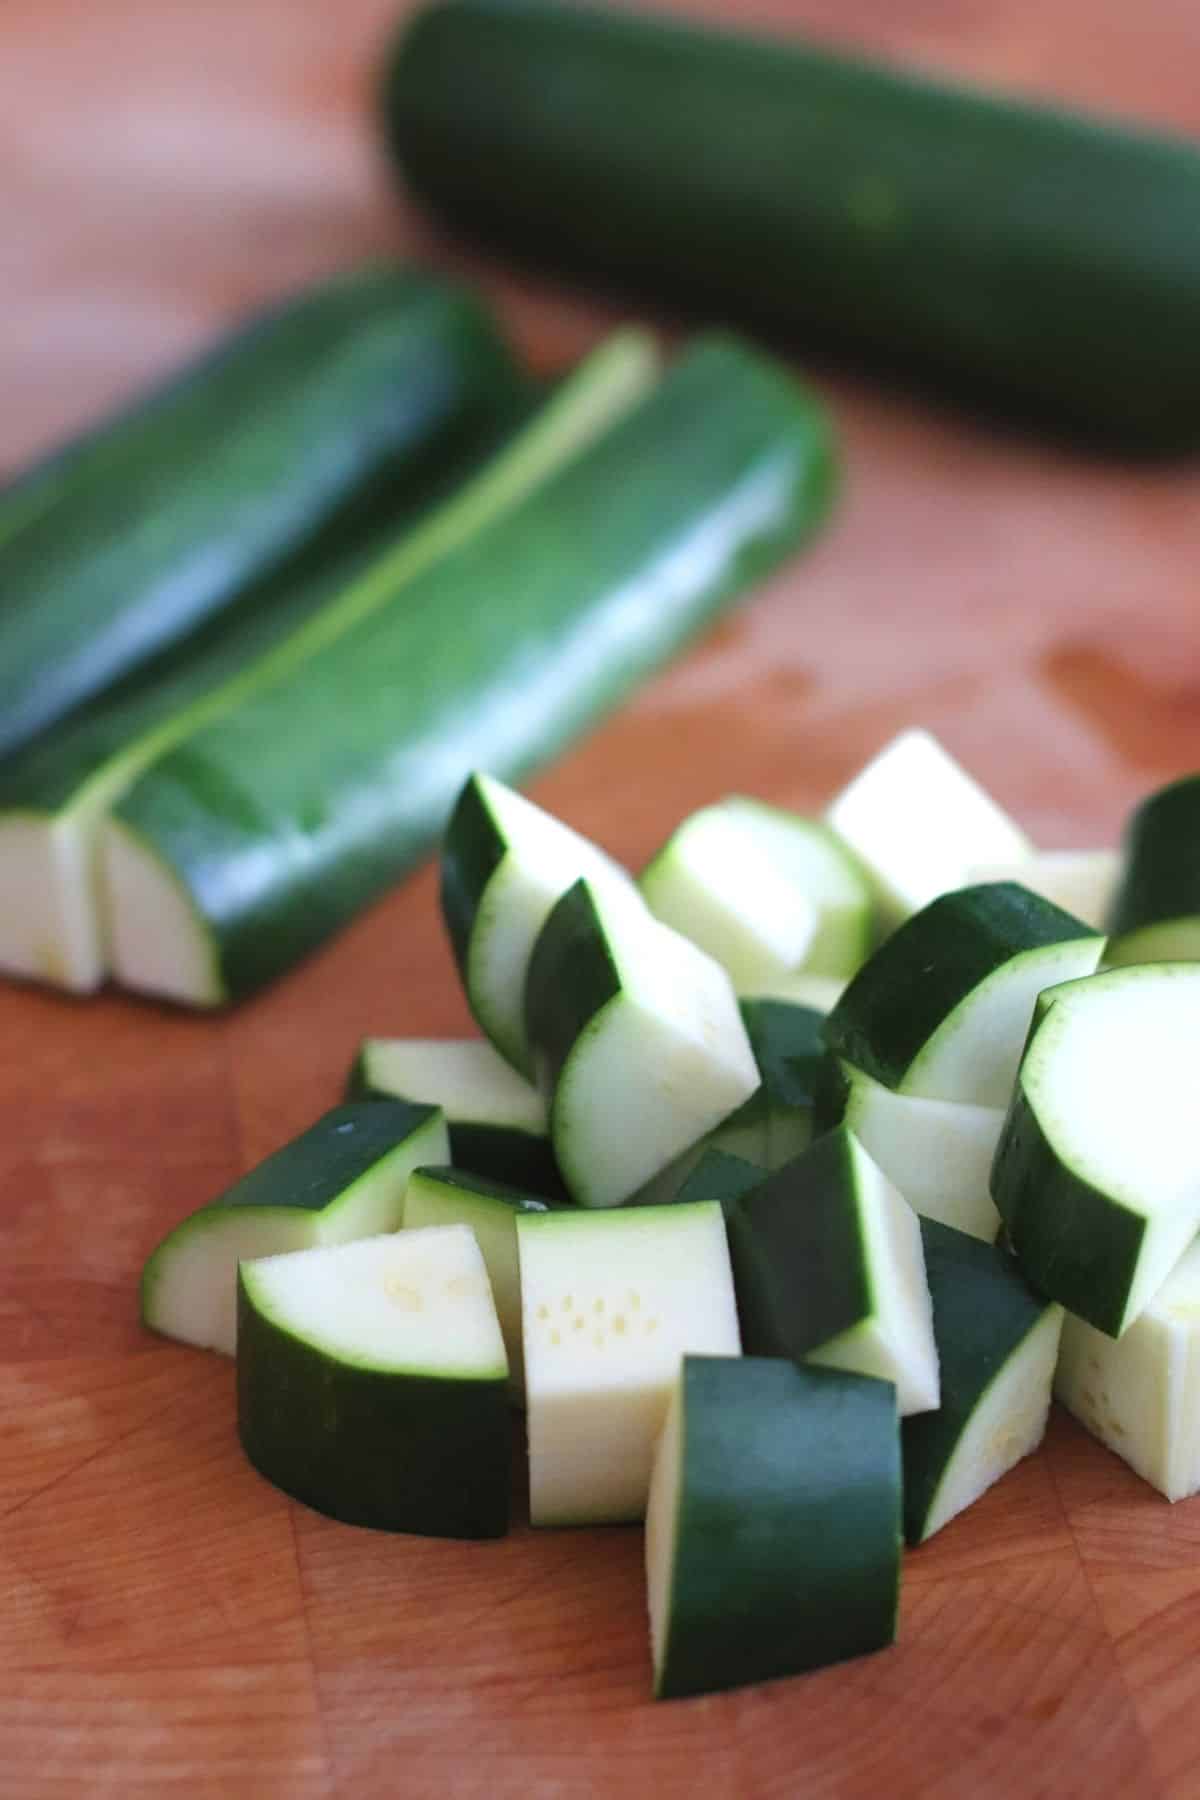 Image showing how to slice the zucchini for this recipe